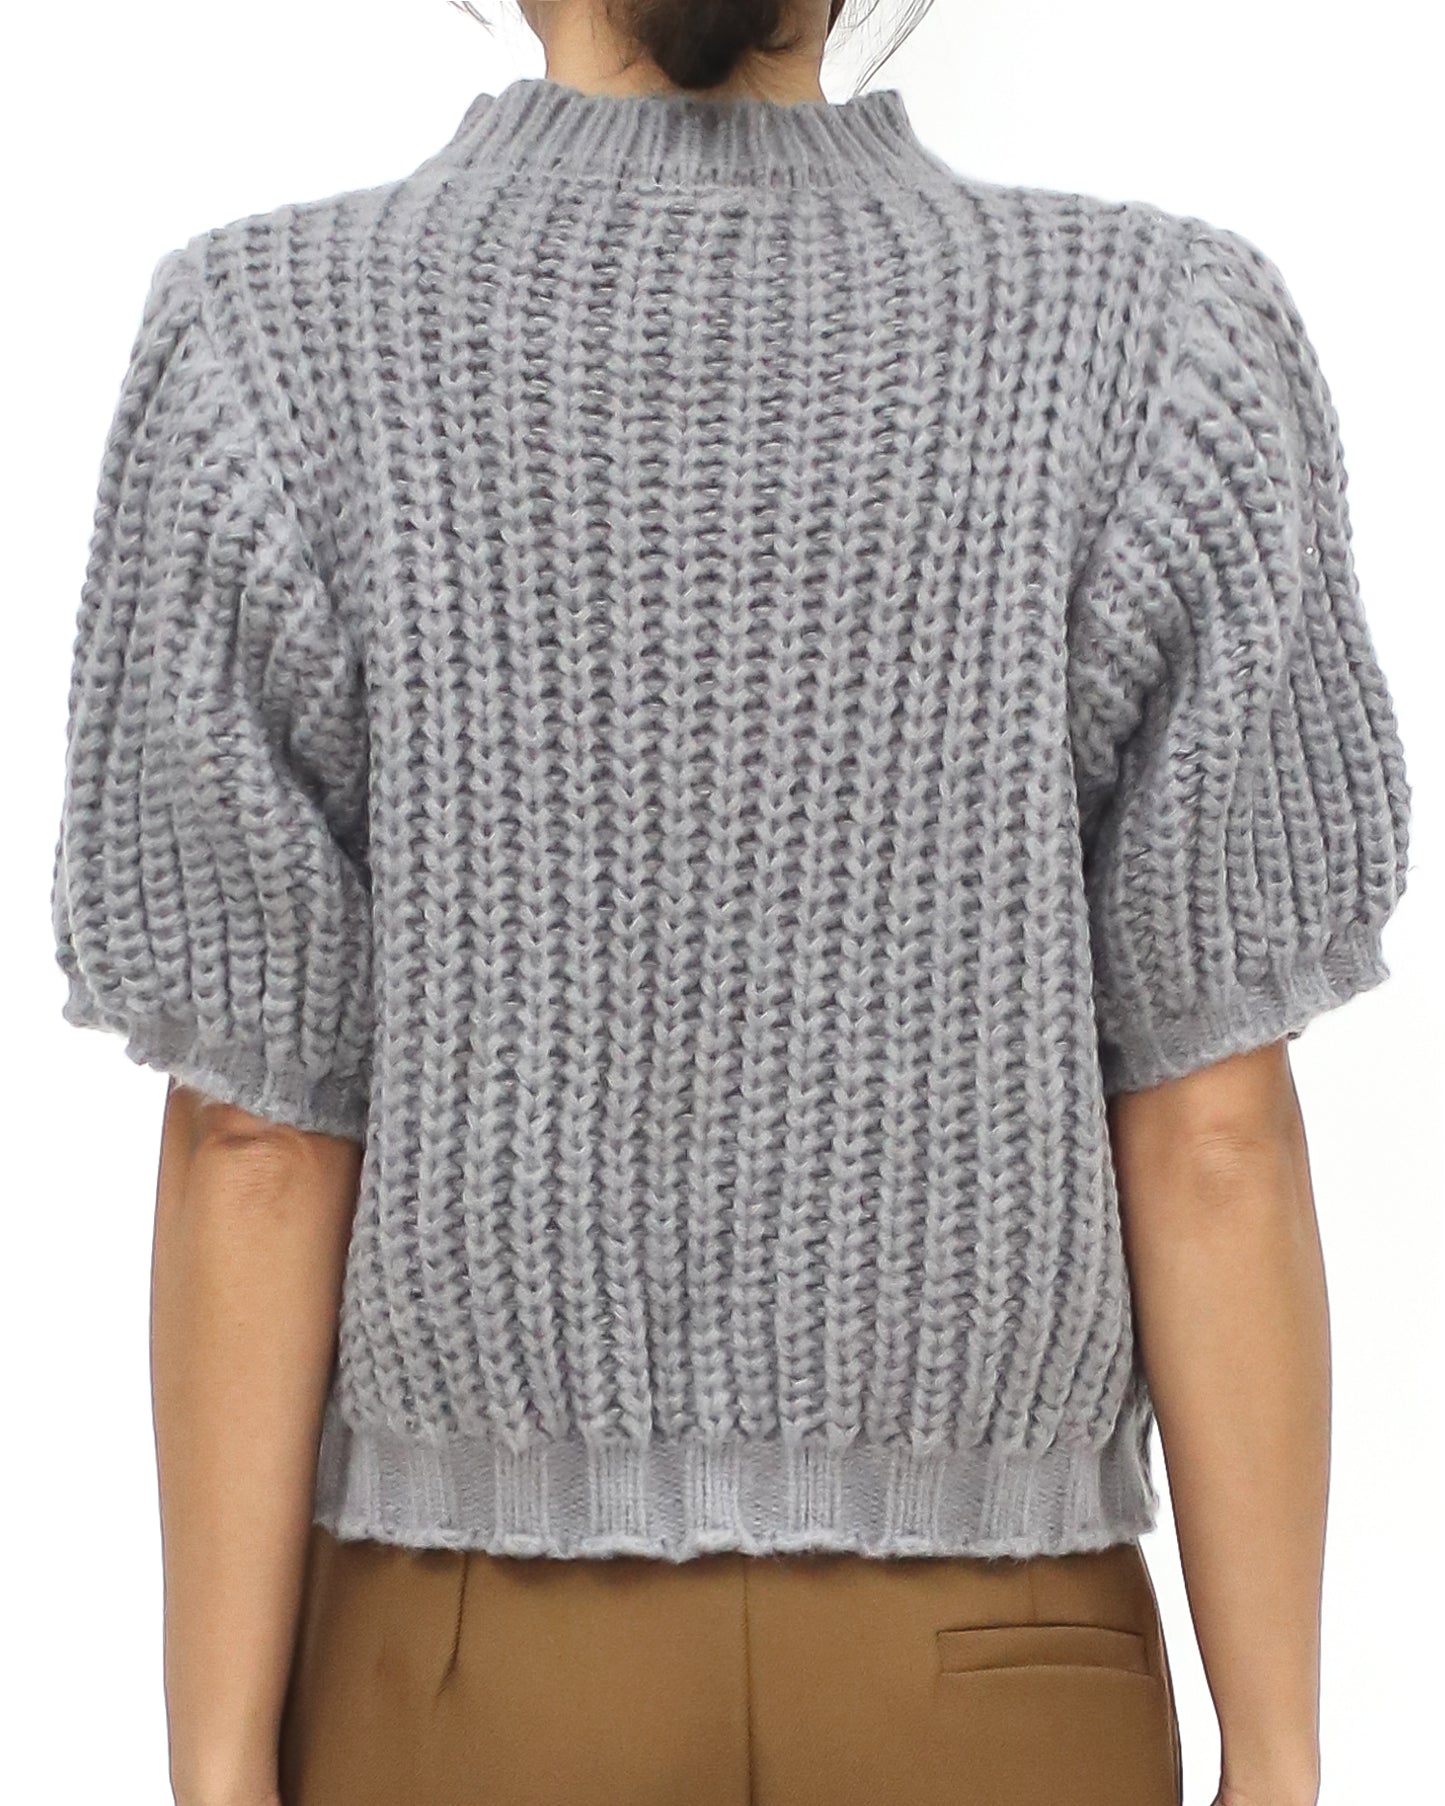 grey twsited knitted top *pre-order*